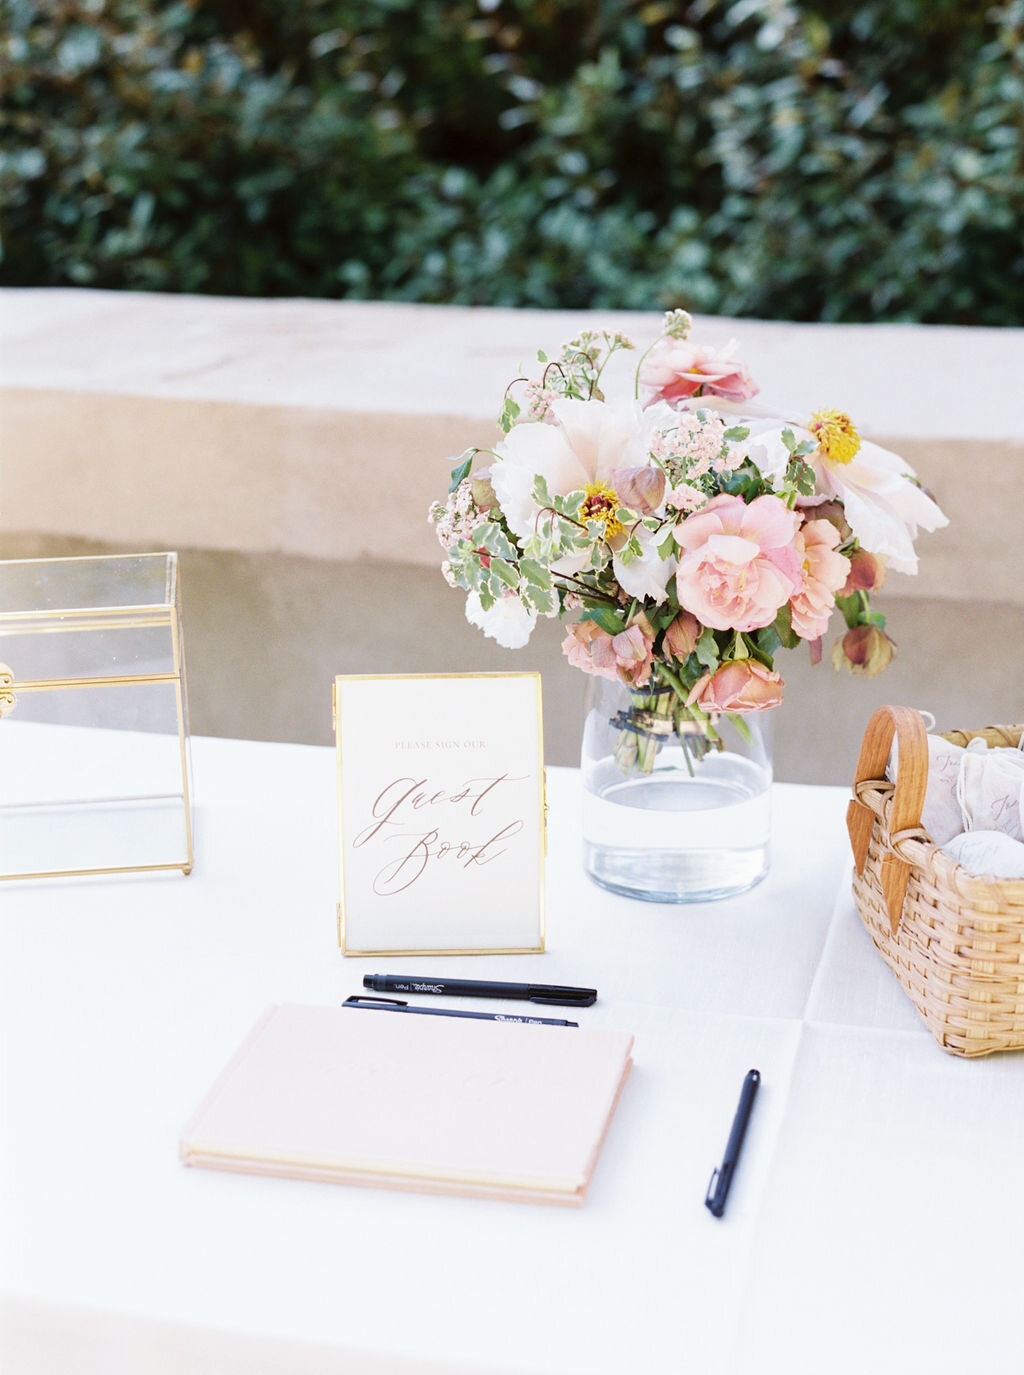 Guest Book and Welcome Table | Simply Charming Socials | Atlanta Wedding Planner